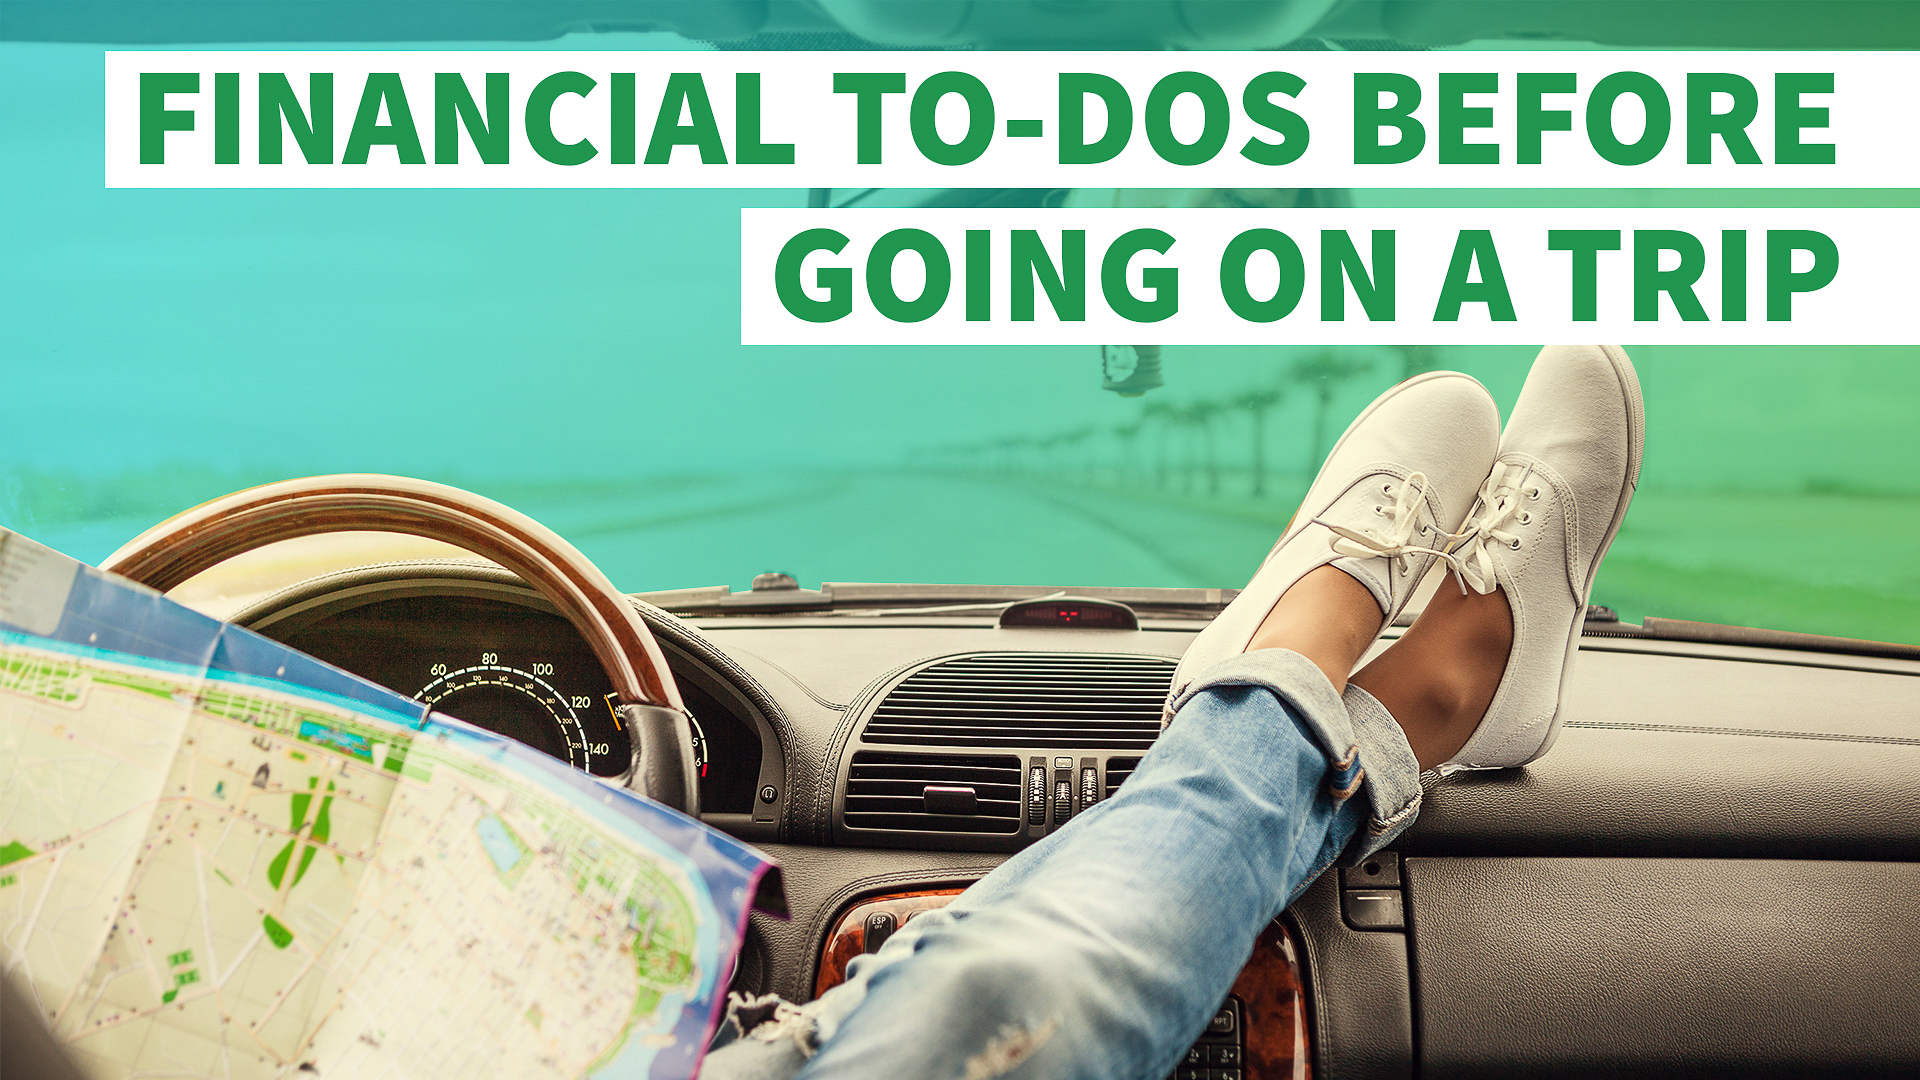 Travel Prep: 10 Financial To-Dos Before Going on a Trip | GOBankingRates